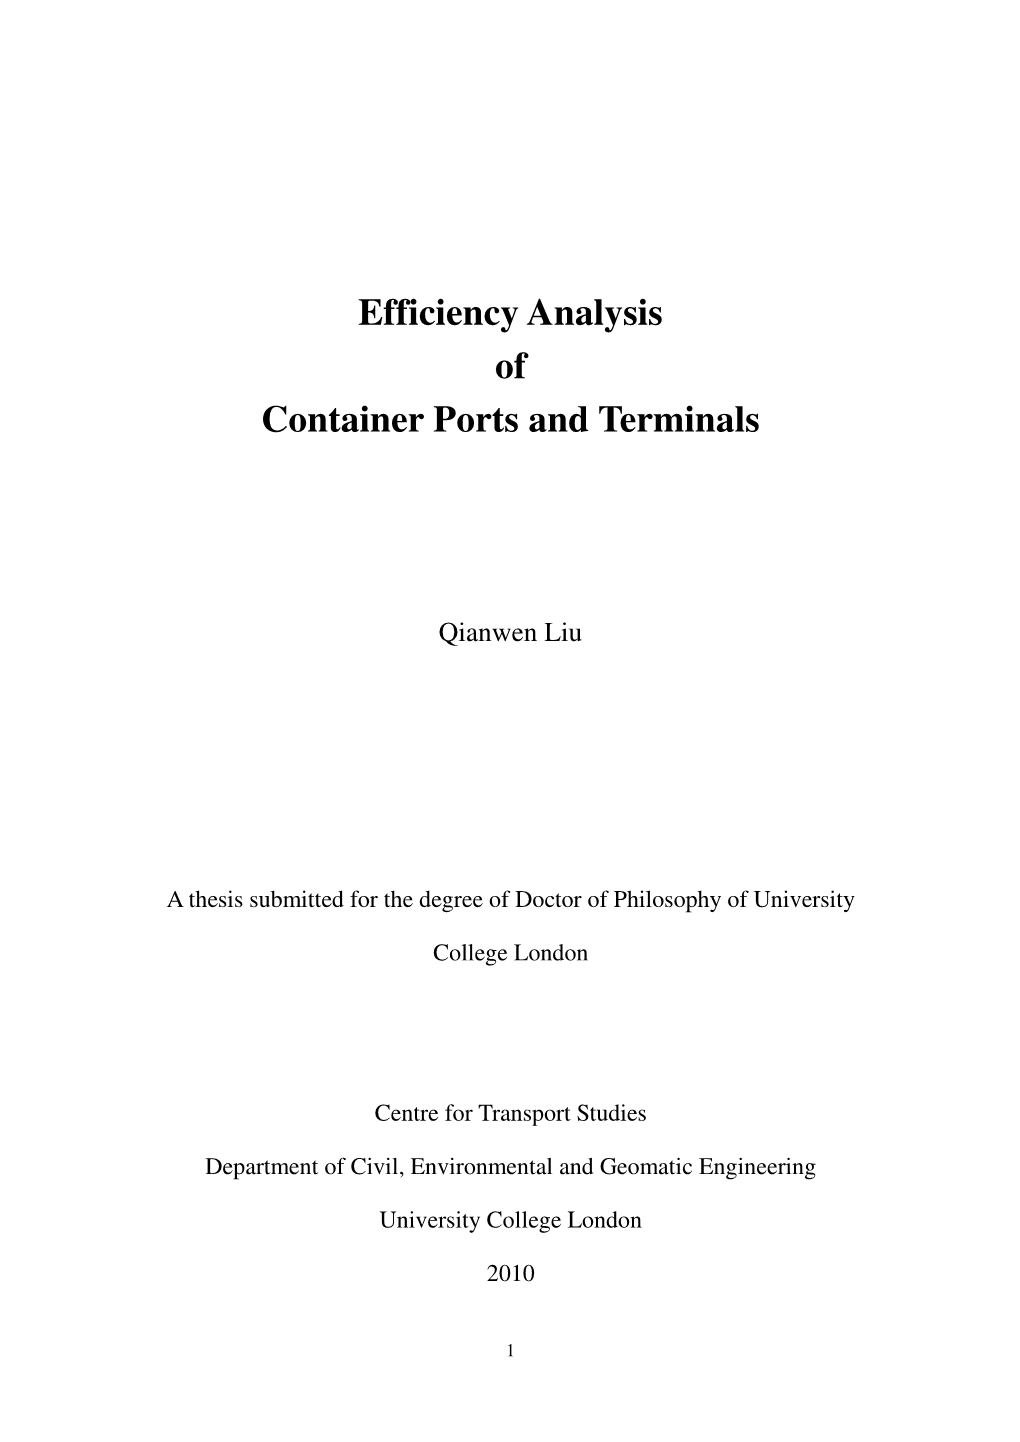 Efficiency Analysis of Container Ports and Terminals